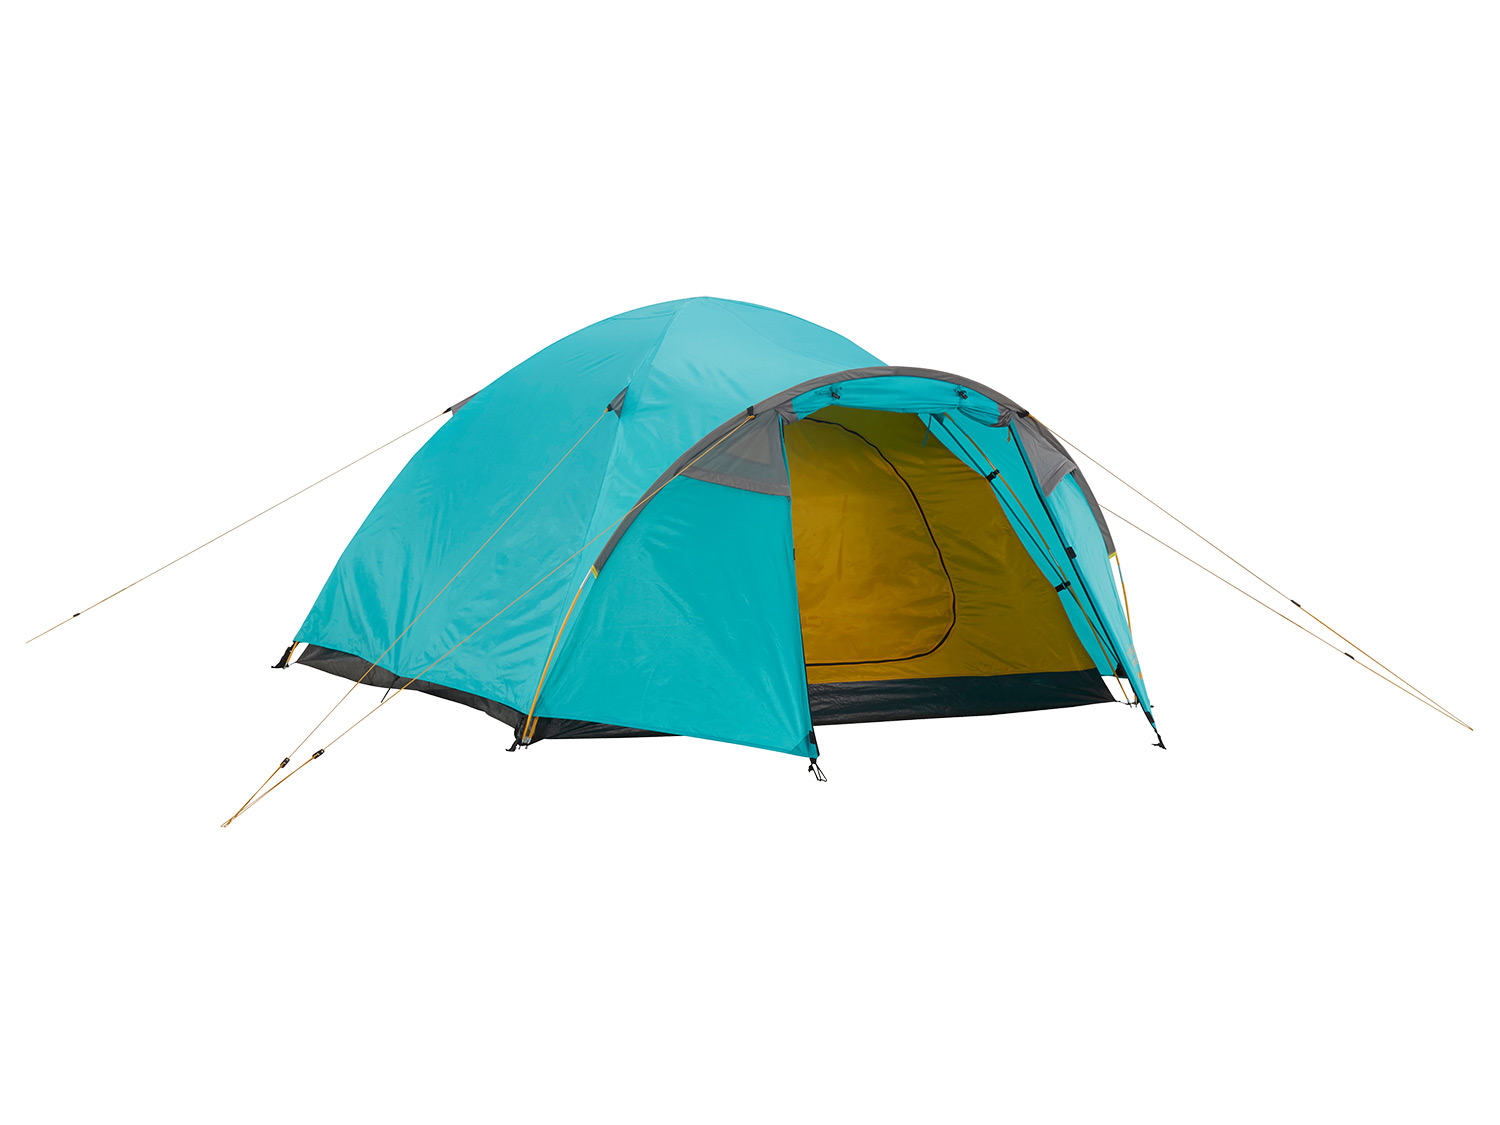 GRAND CANYON koepeltent TOPEKA 3, 3 Personen